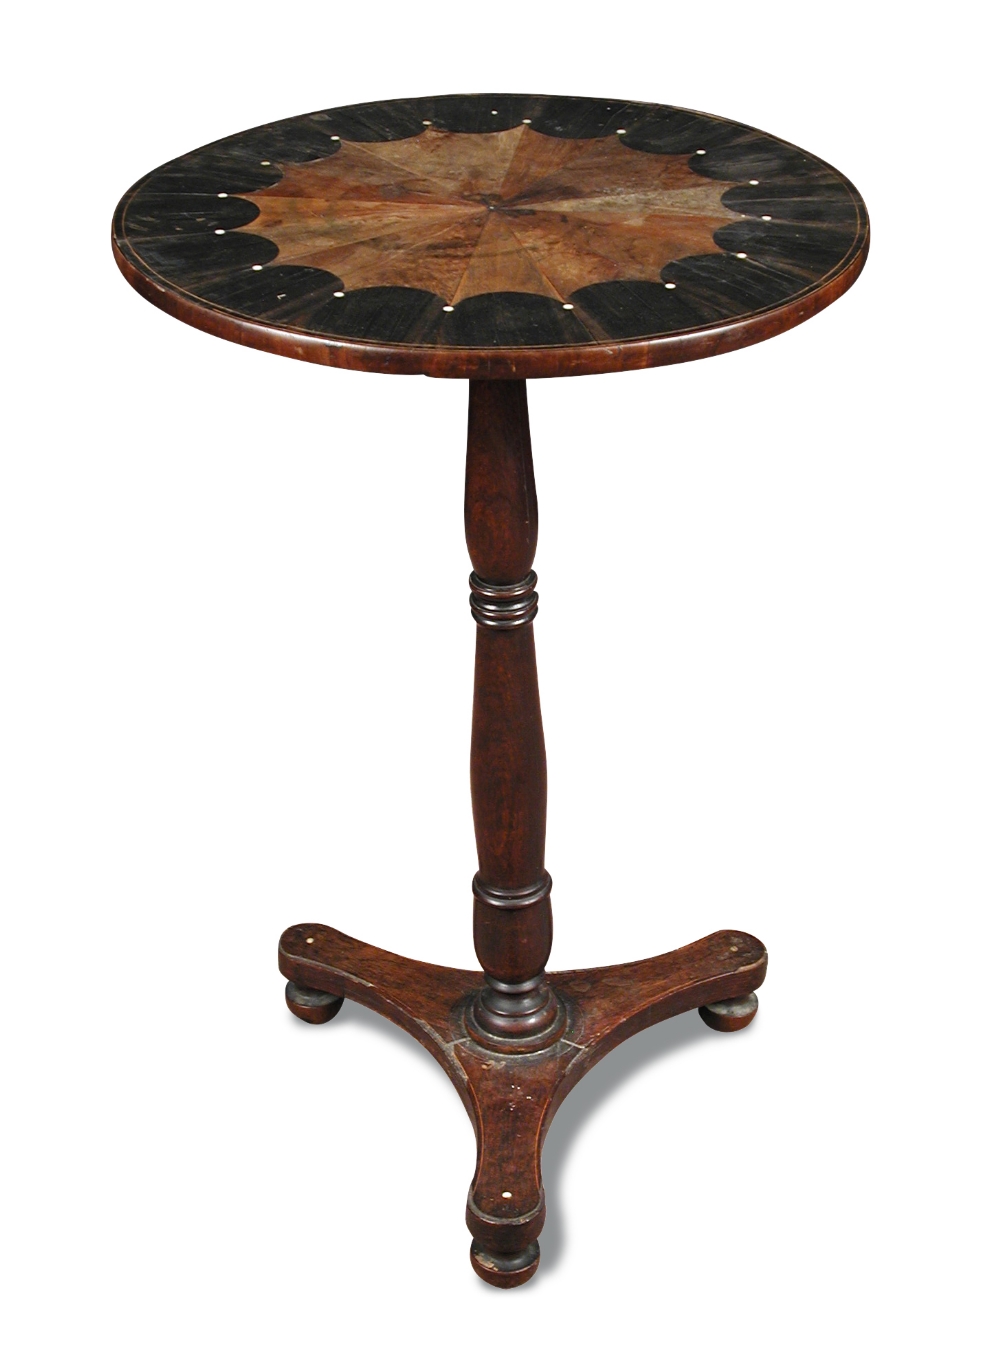 A late Regency coromandel wood pedestal occasional table, with radiating specimen wood inlaid